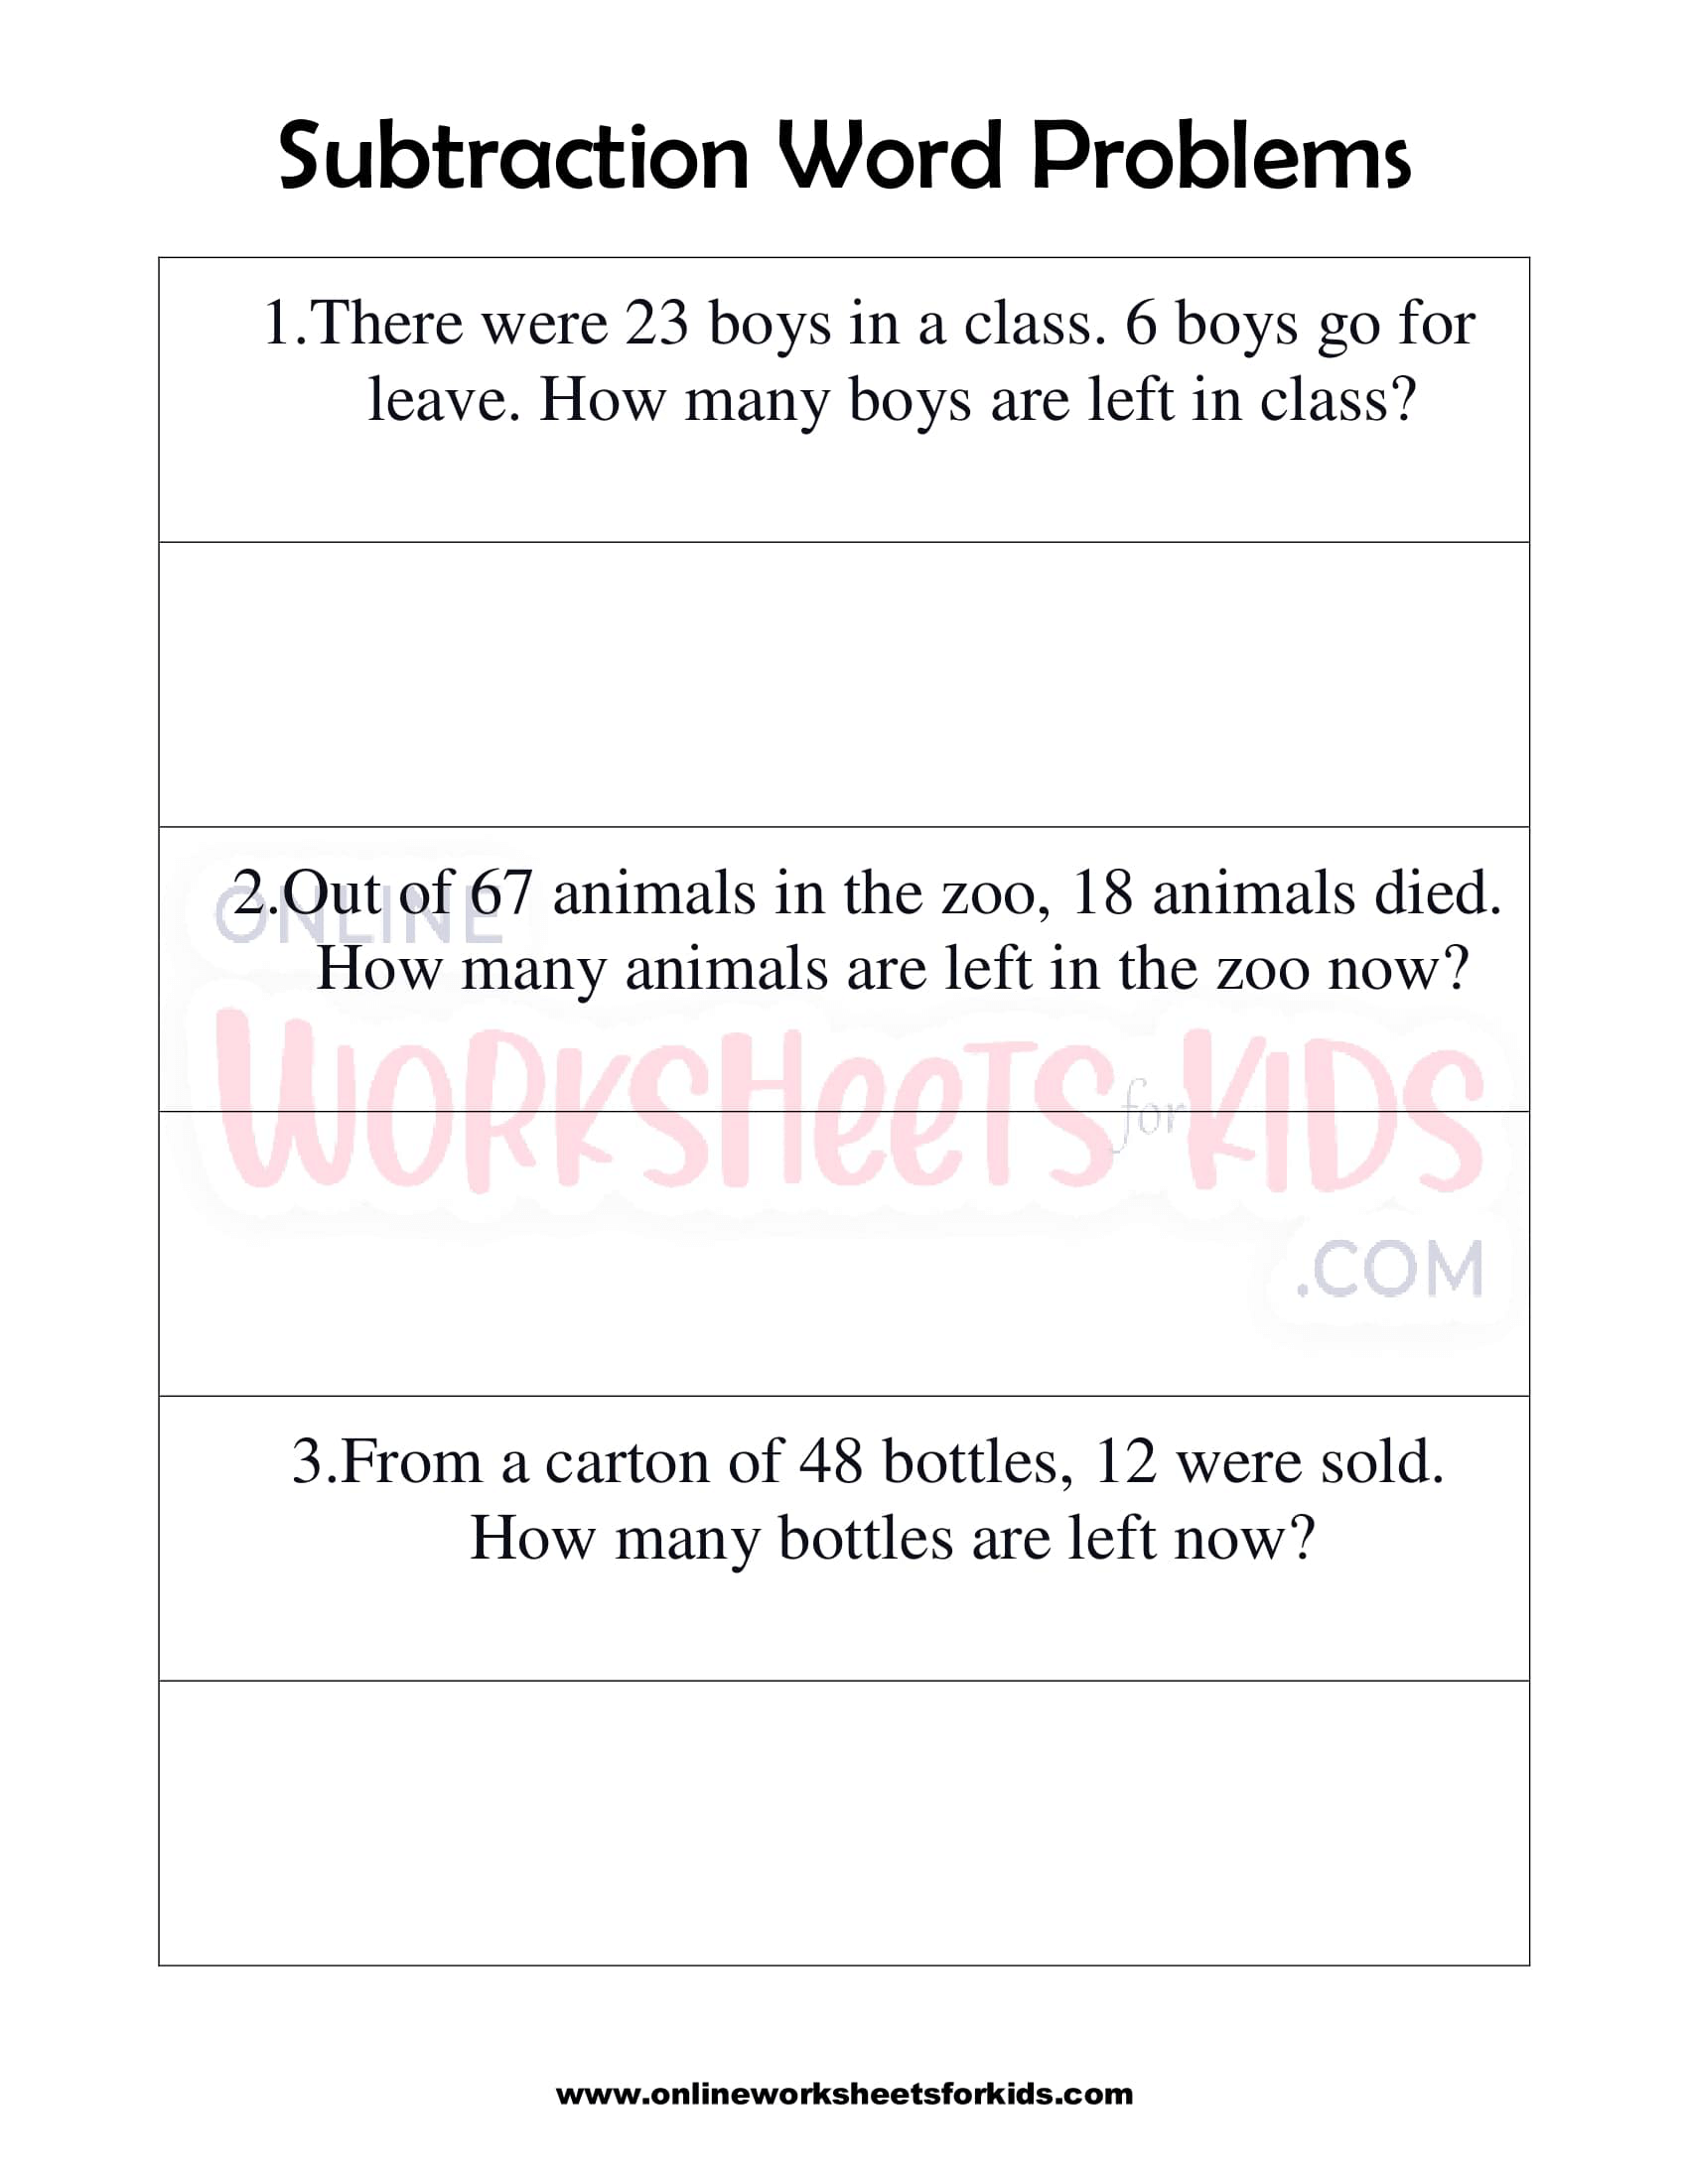 Subtraction Word Problems 01